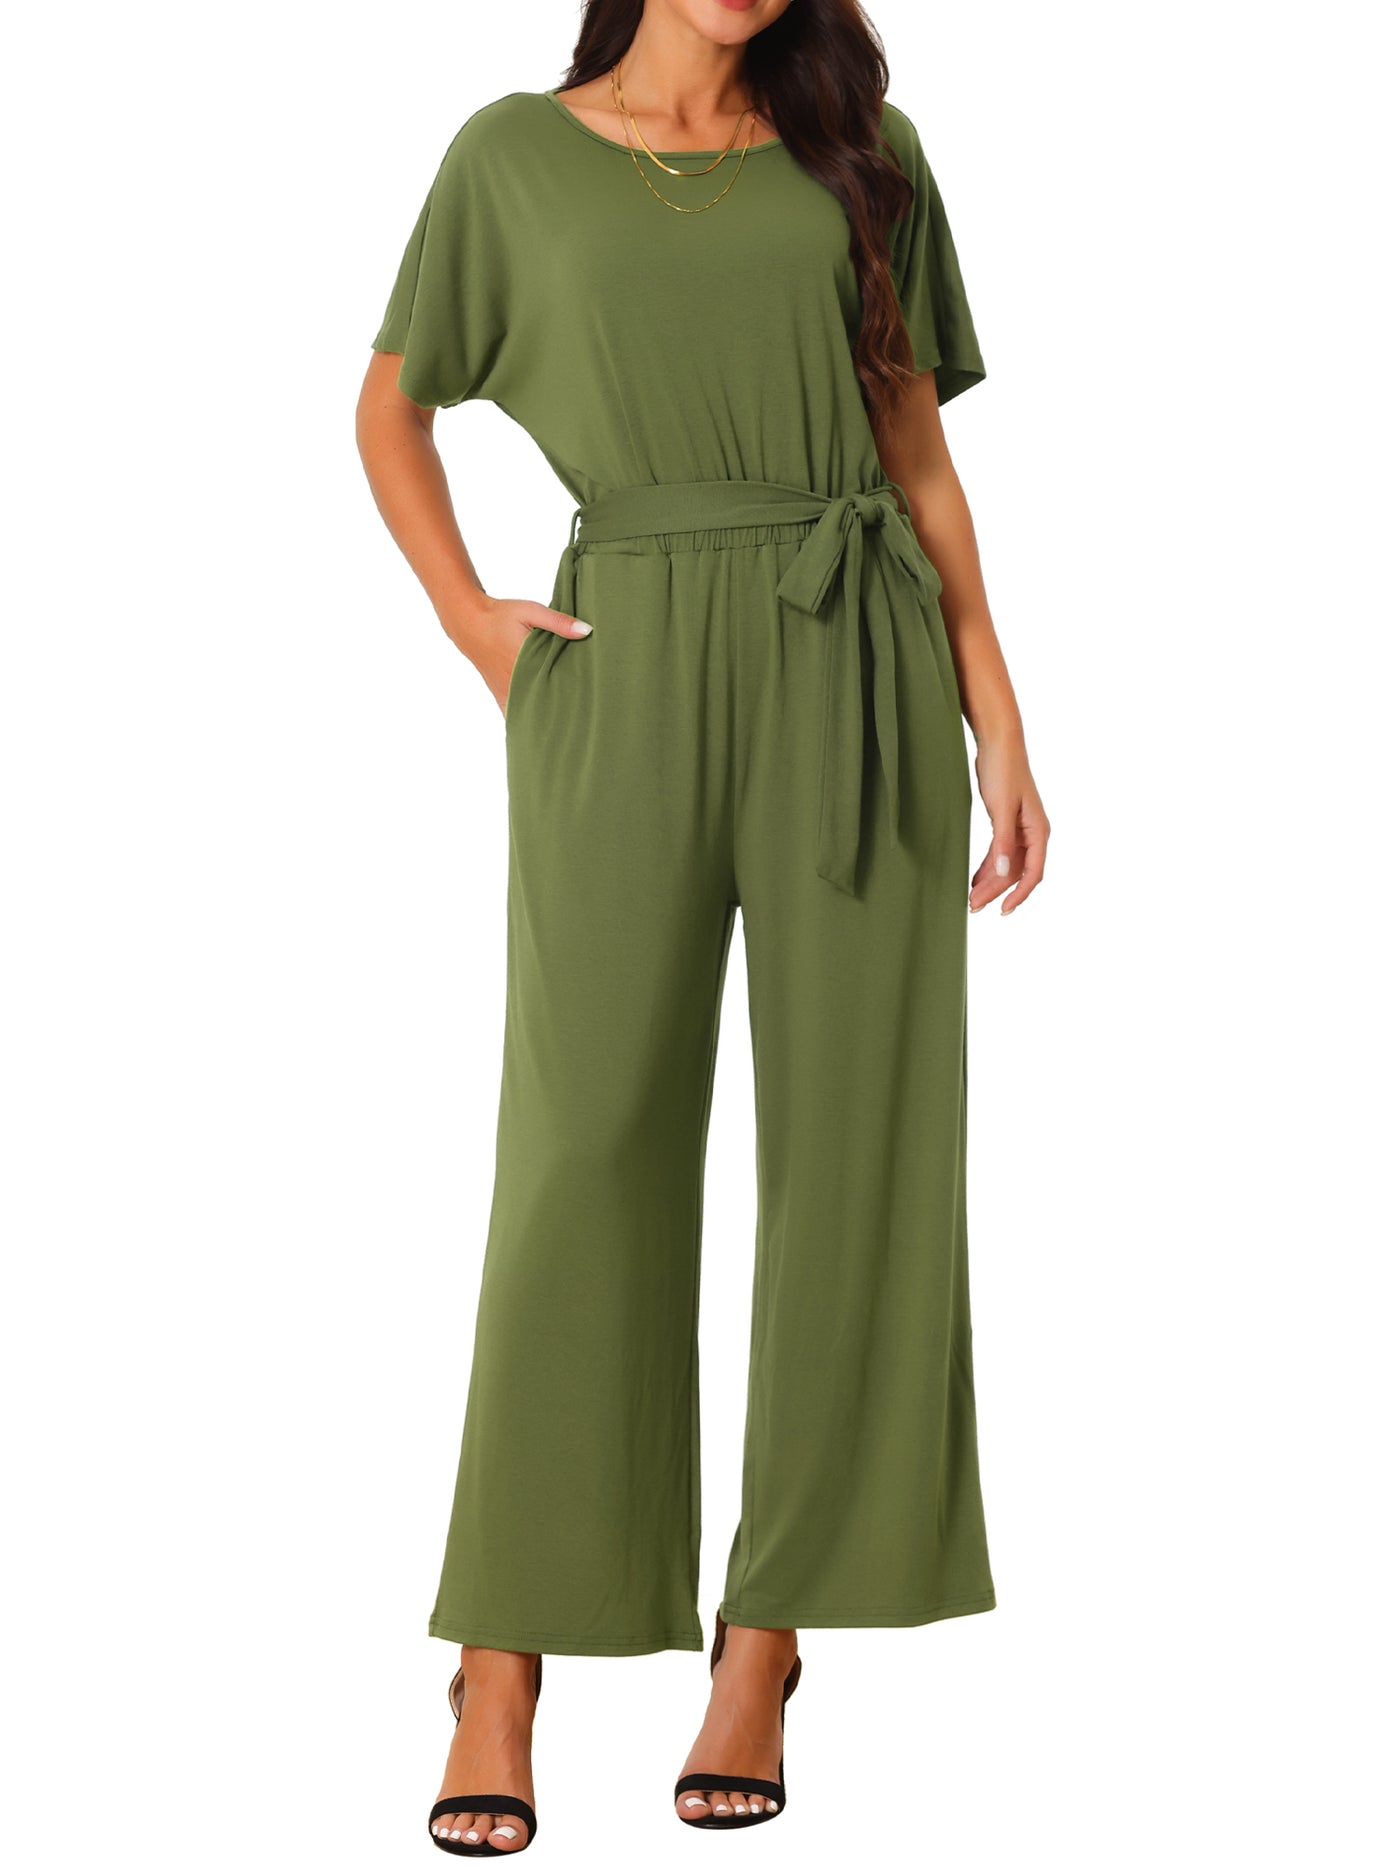 Bublédon Women's Crewneck Short Sleeve Belted High Waist Wide Leg Casual Dressy Jumpsuits with Pockets